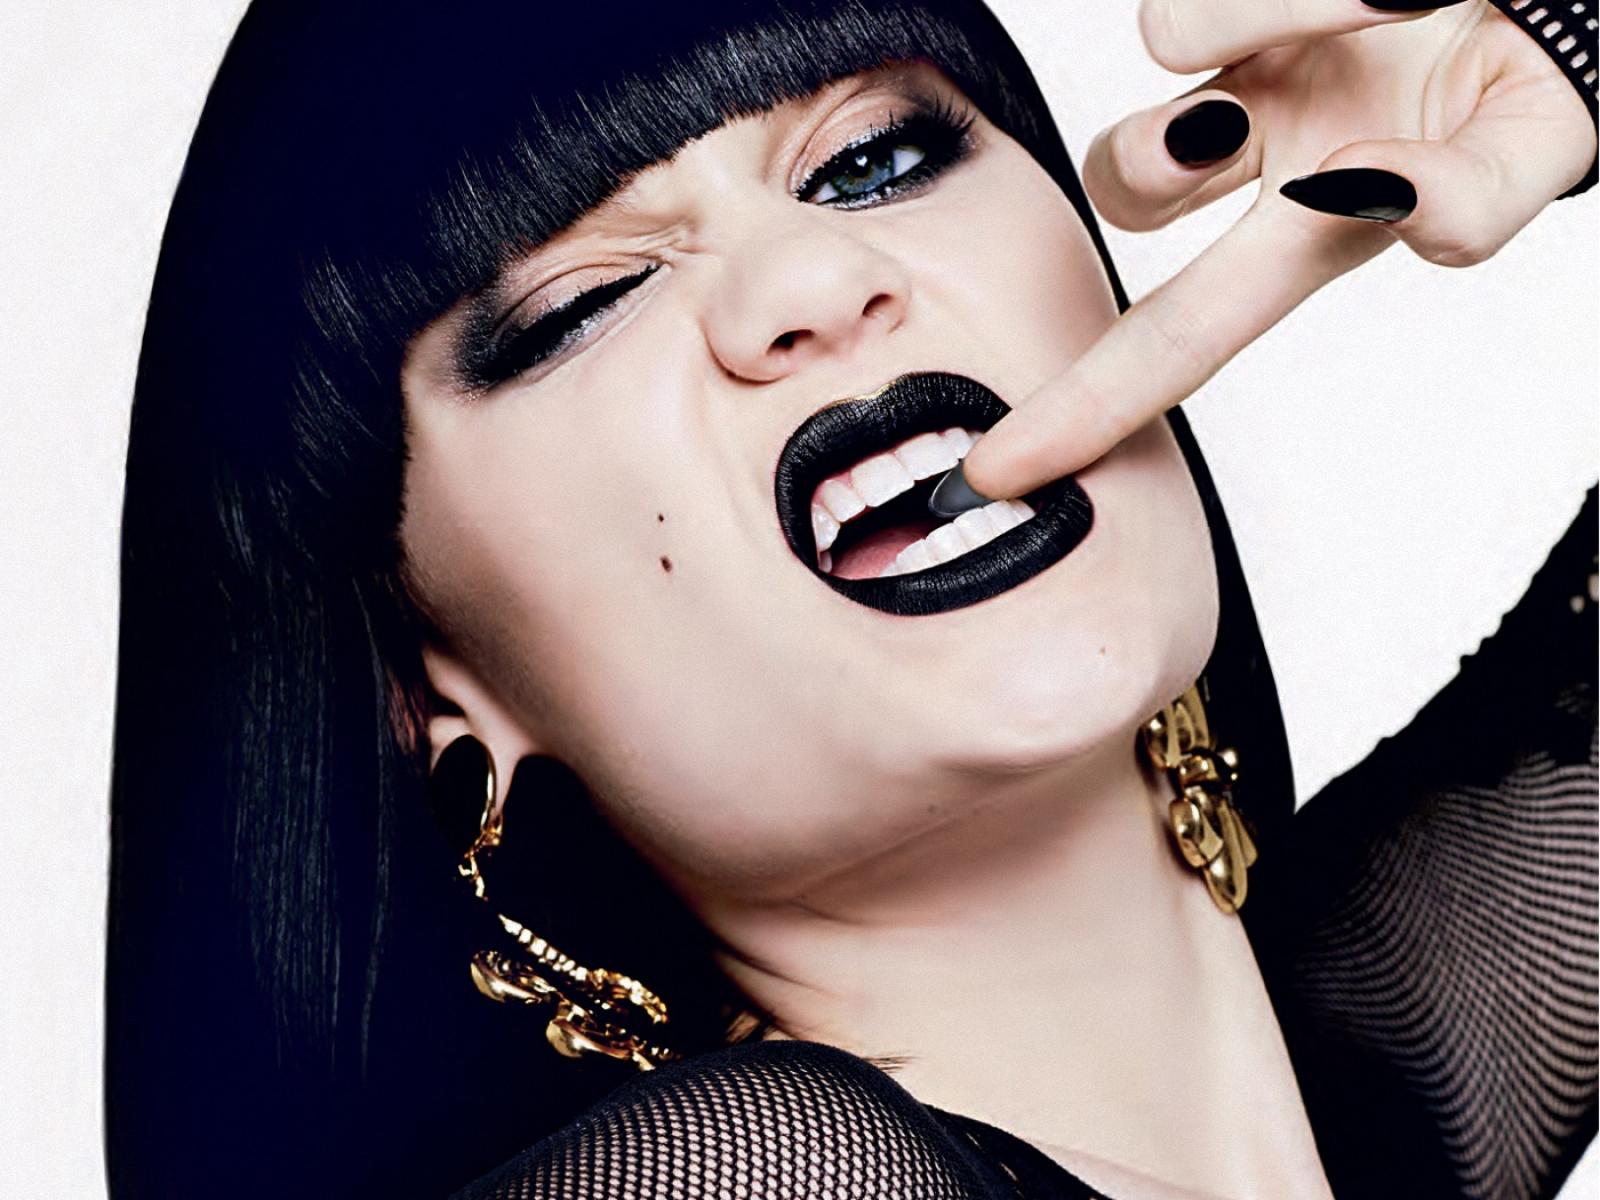 Jessie J awesome and fabulous image HD wallpaper photo